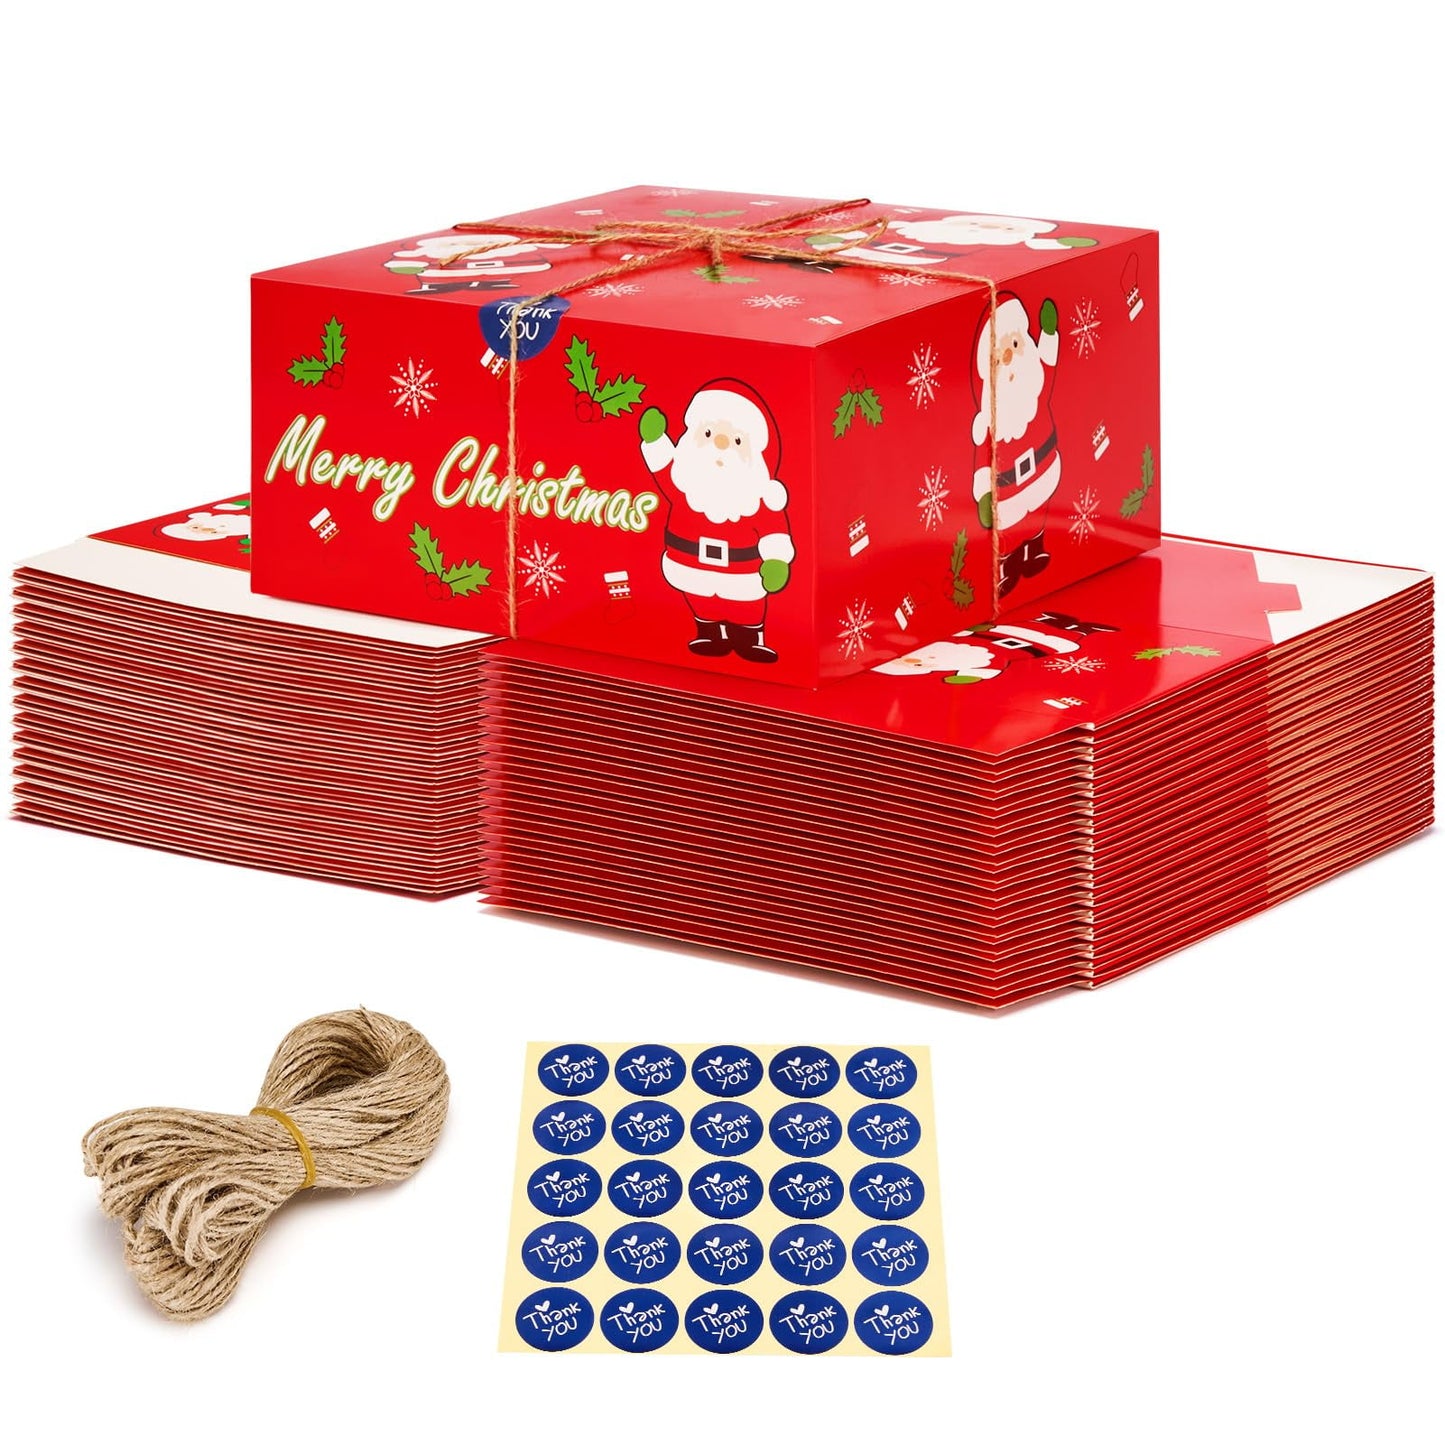 Facsco 15 Pack Christmas Gift Boxes with Lids for Presents, 8x8x4 Inch,Red